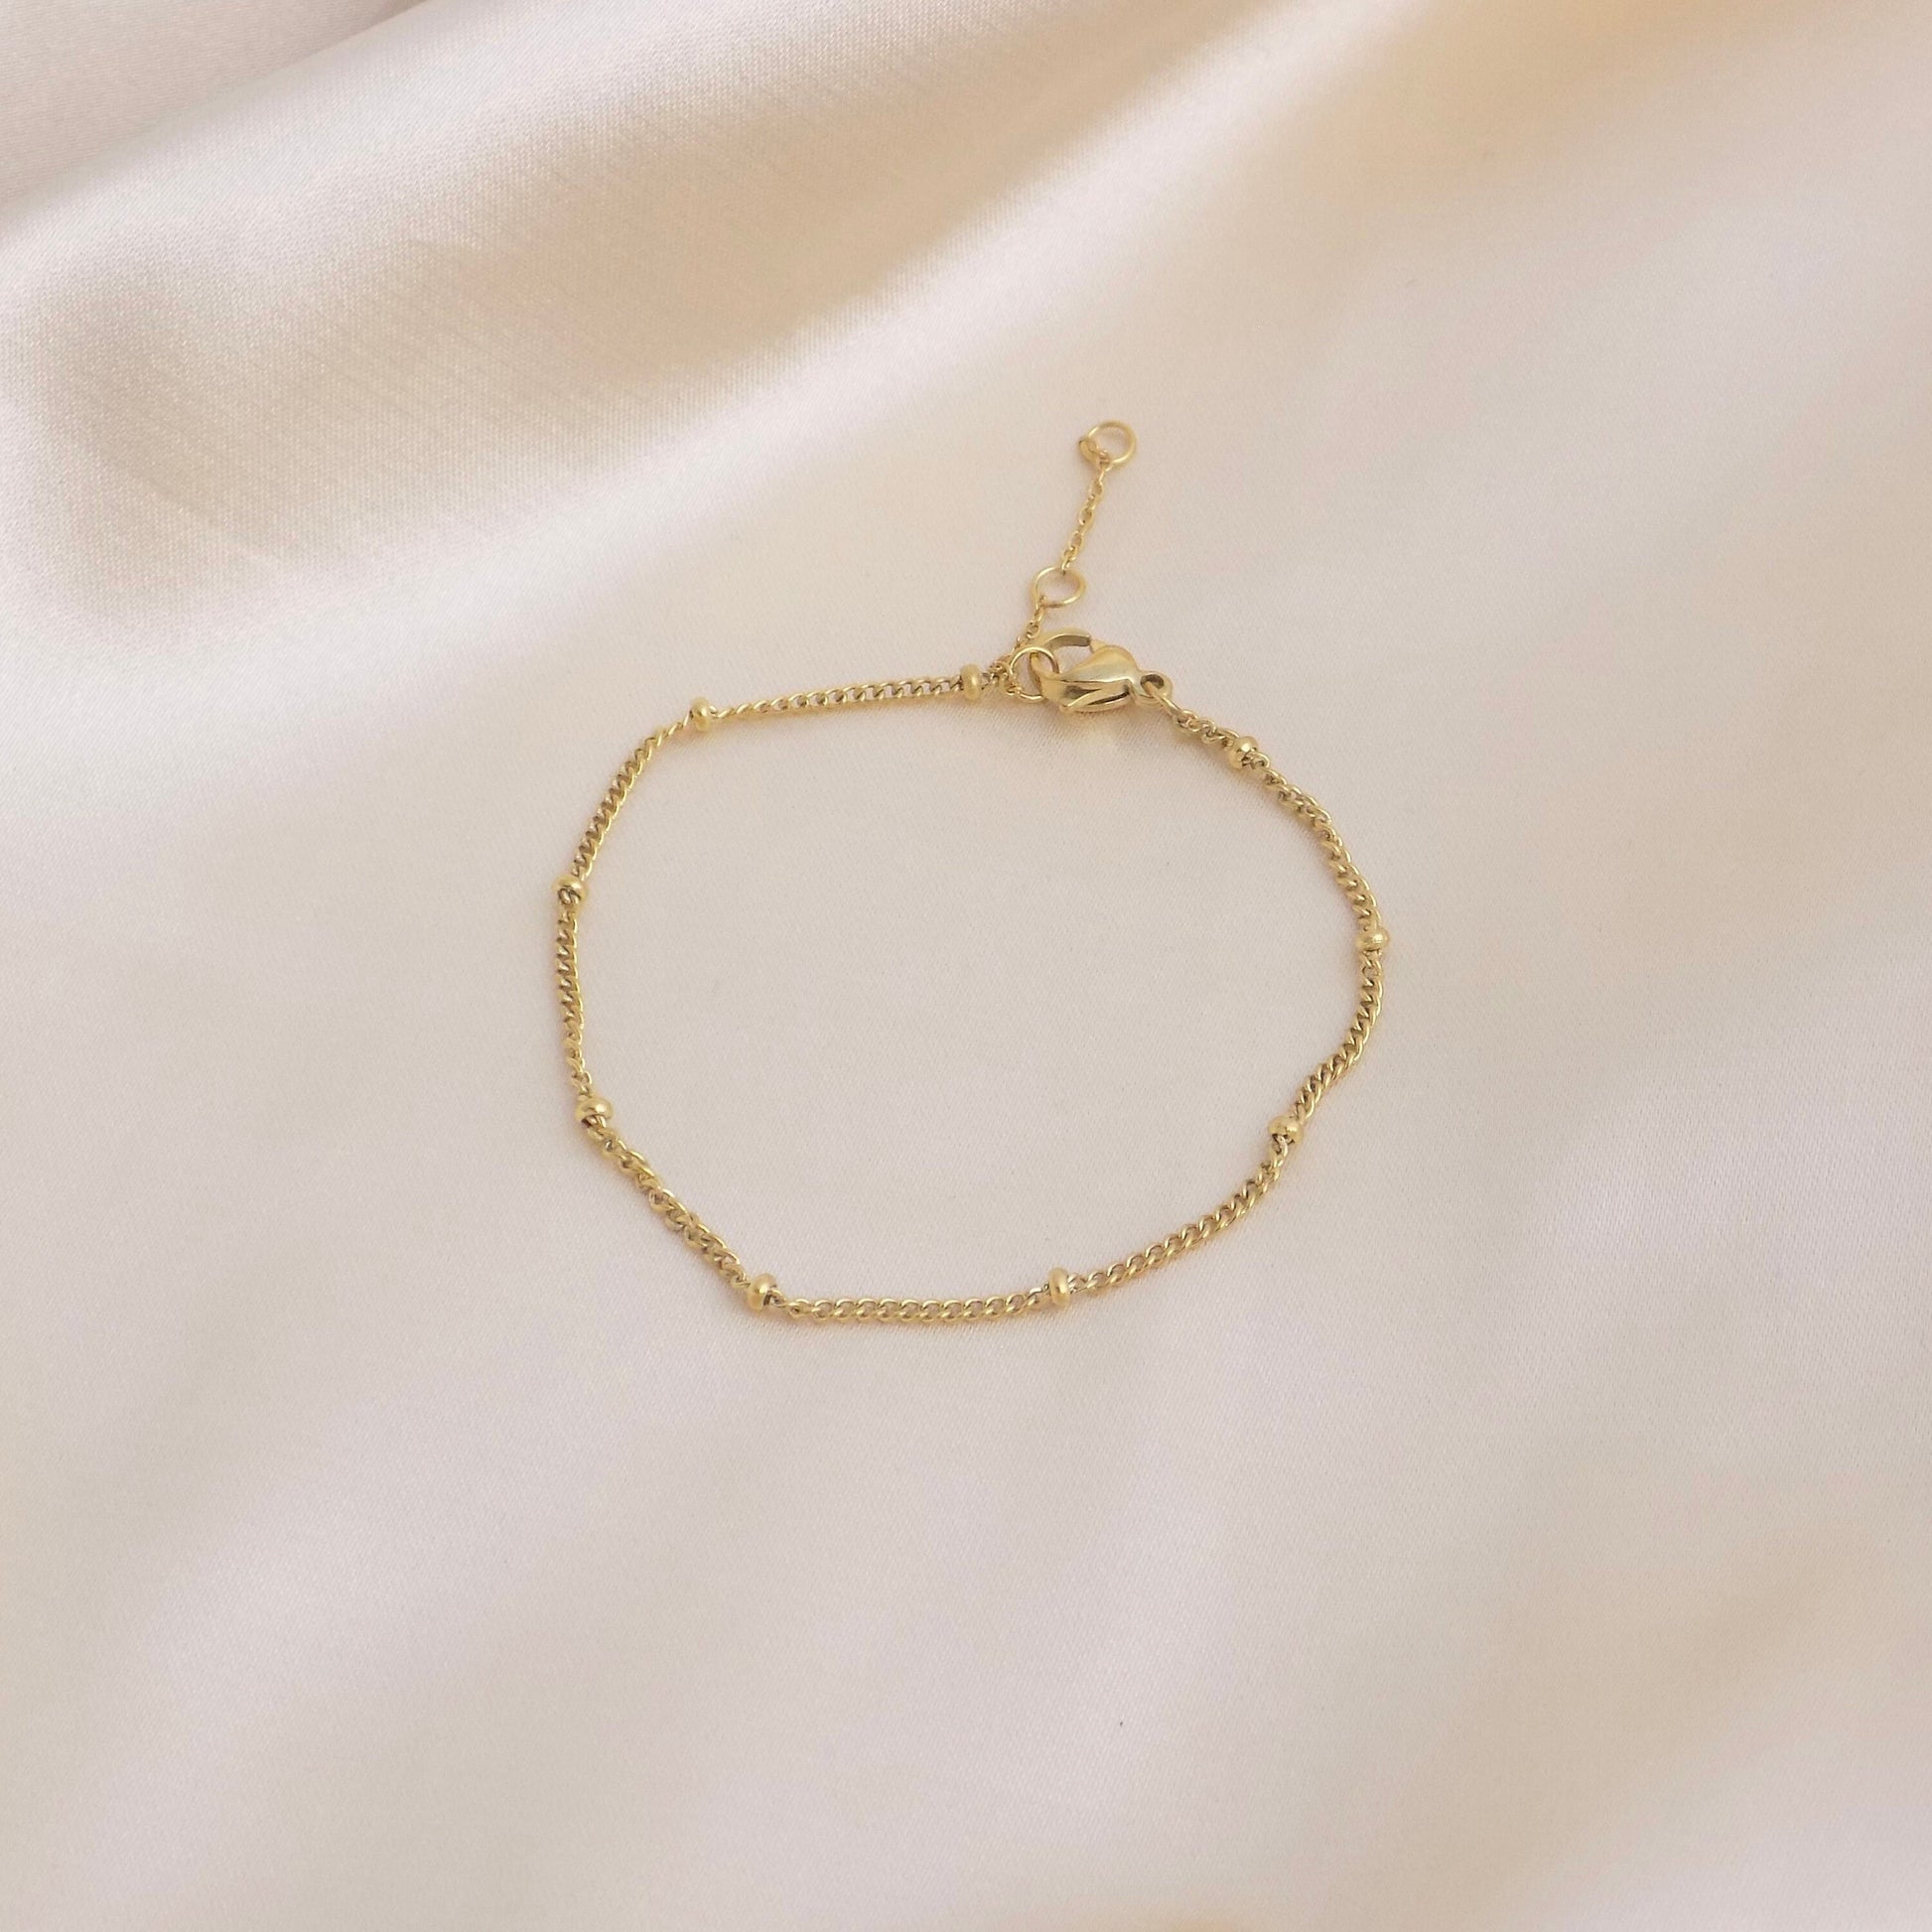 Satellite Chain Bracelet, 18K Gold Stainless Steel, Delicate Gold Layer, Dainty Super Thin Bracelet, Simple Everyday Adjustable, M6-106